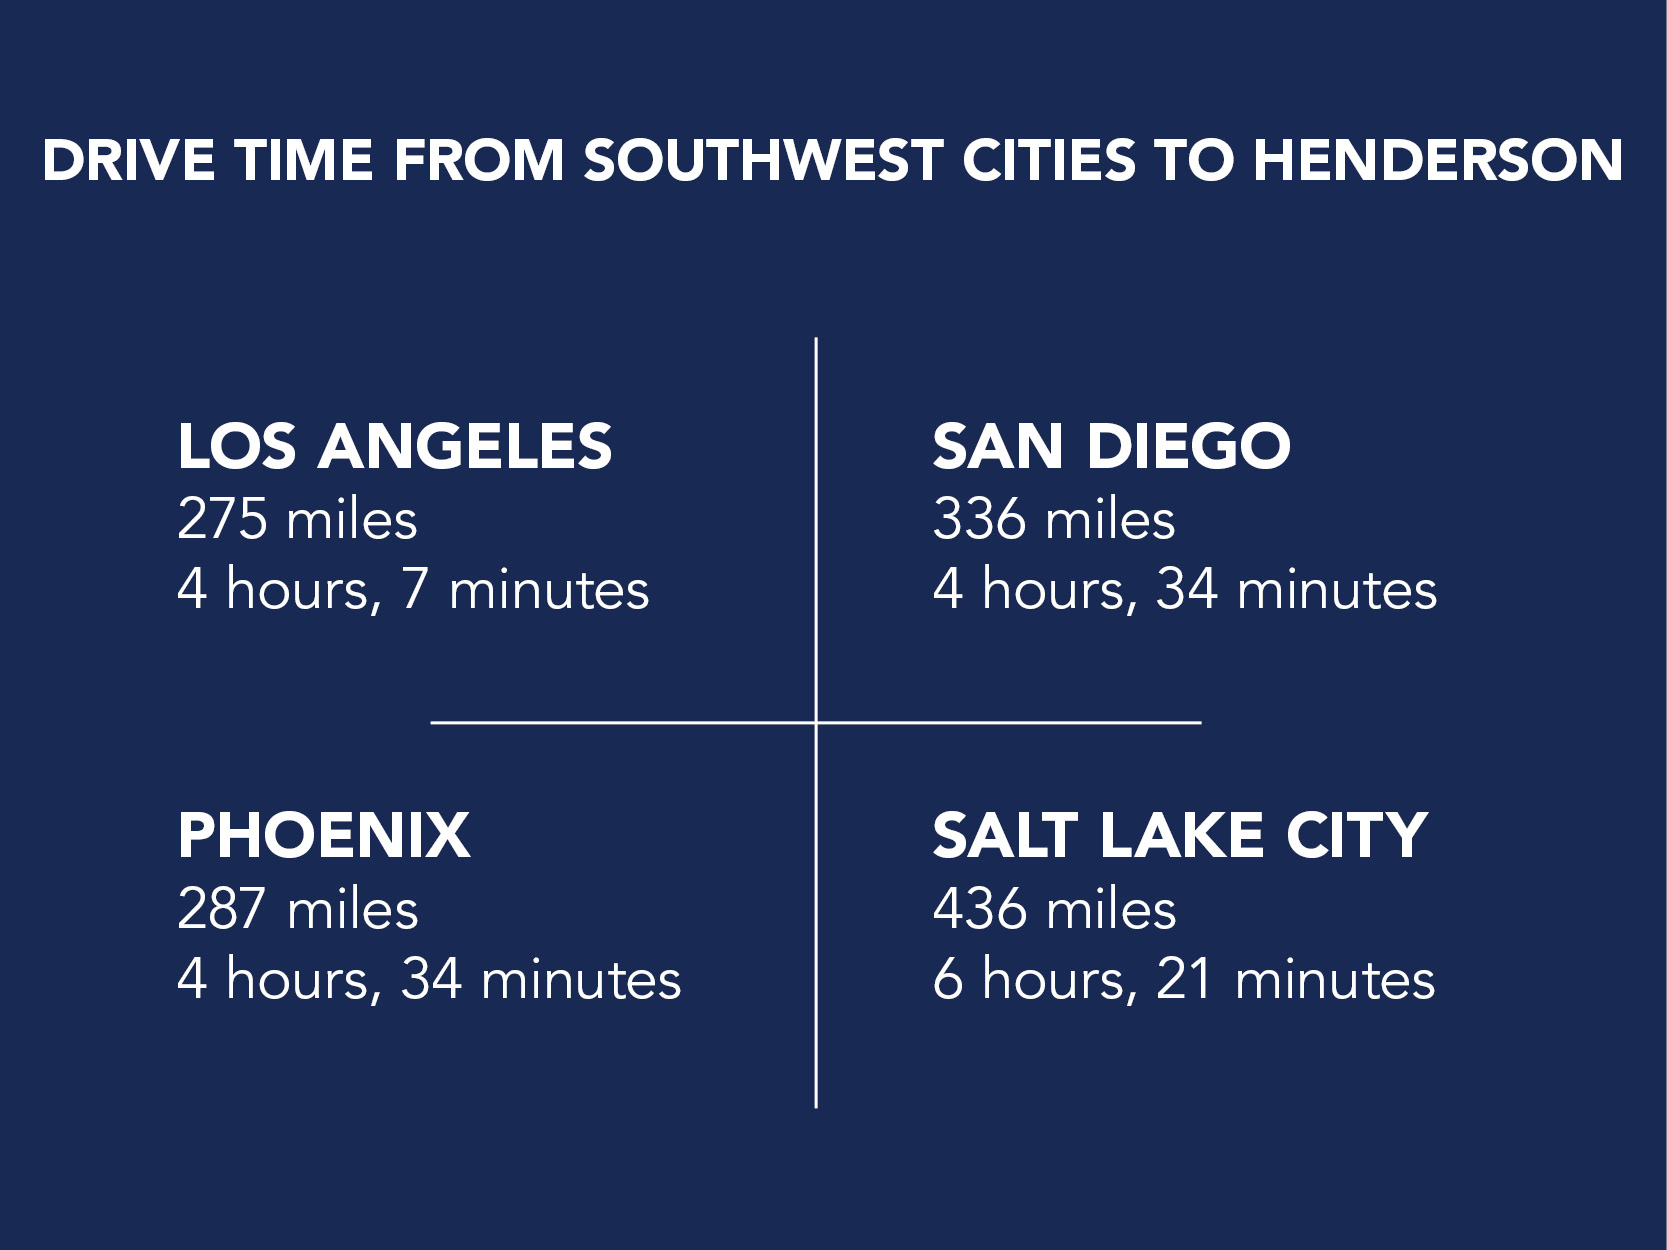 Graphic showing average drive time to Henderson from Southwest cities